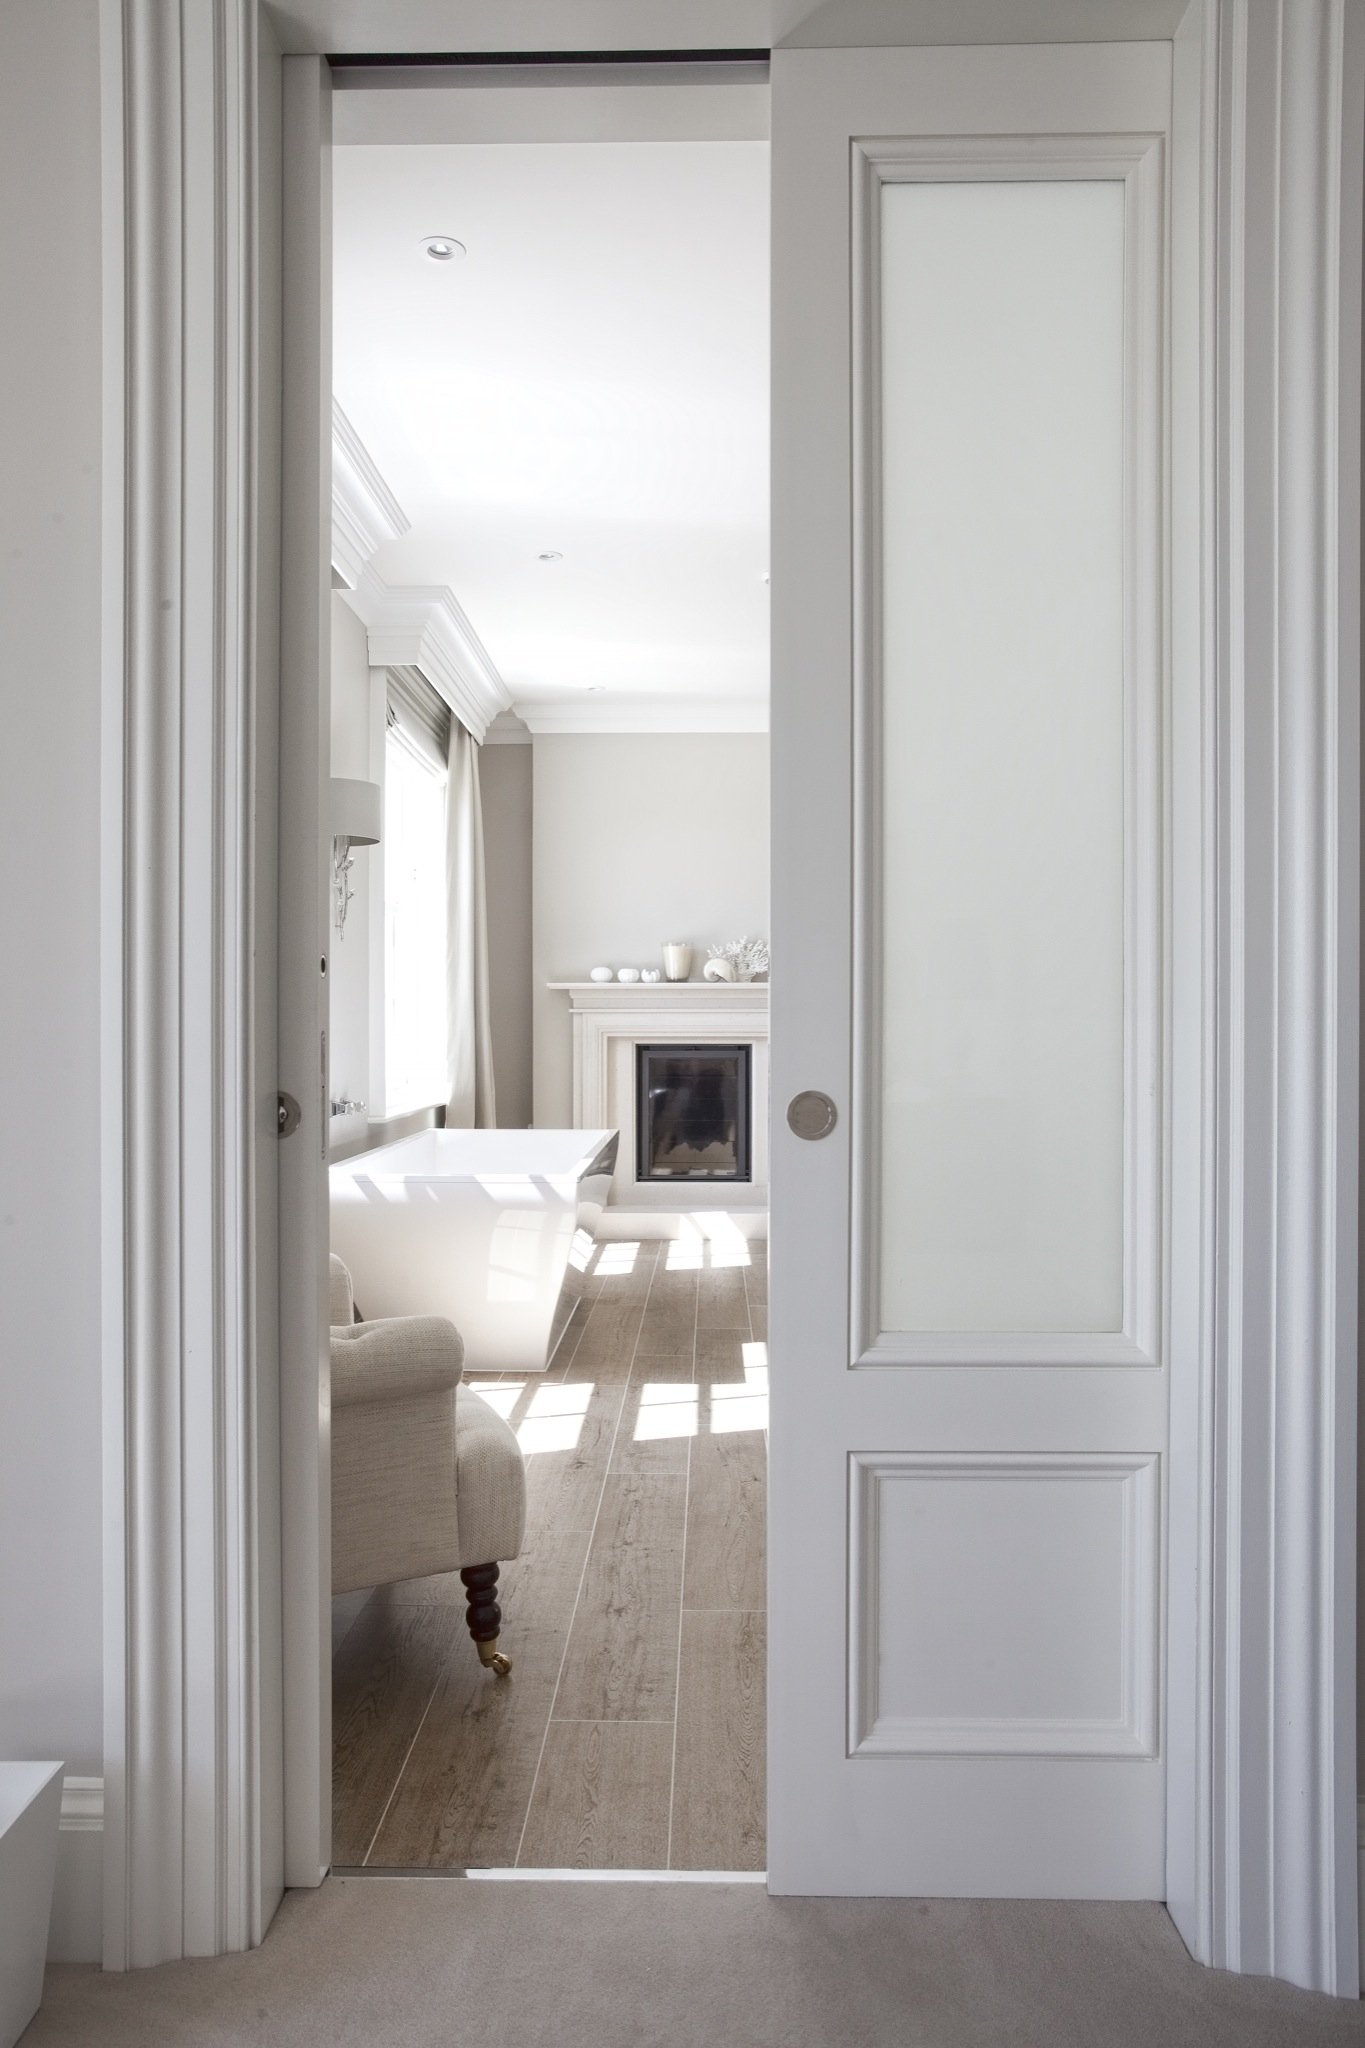 A cool natural lighting tip is to remove doors entirely for better light flow, especially in a tiny apartment.